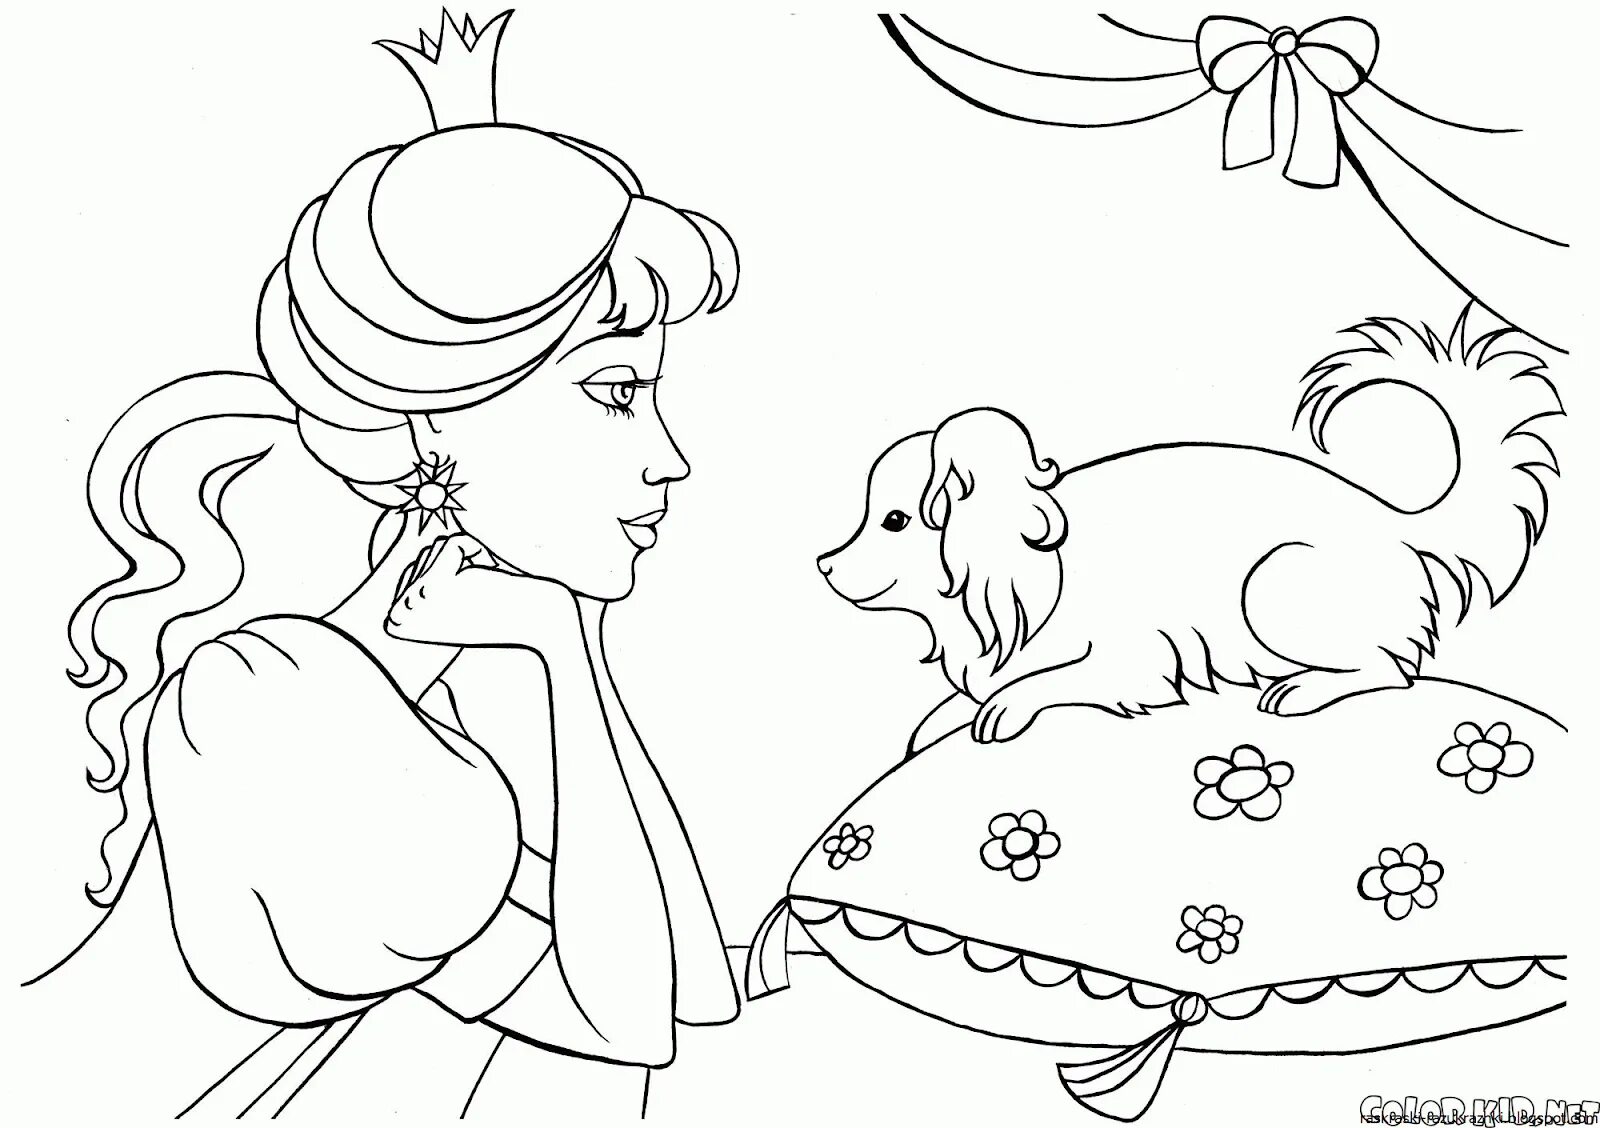 Princess sky coloring pages for girls 7 years old